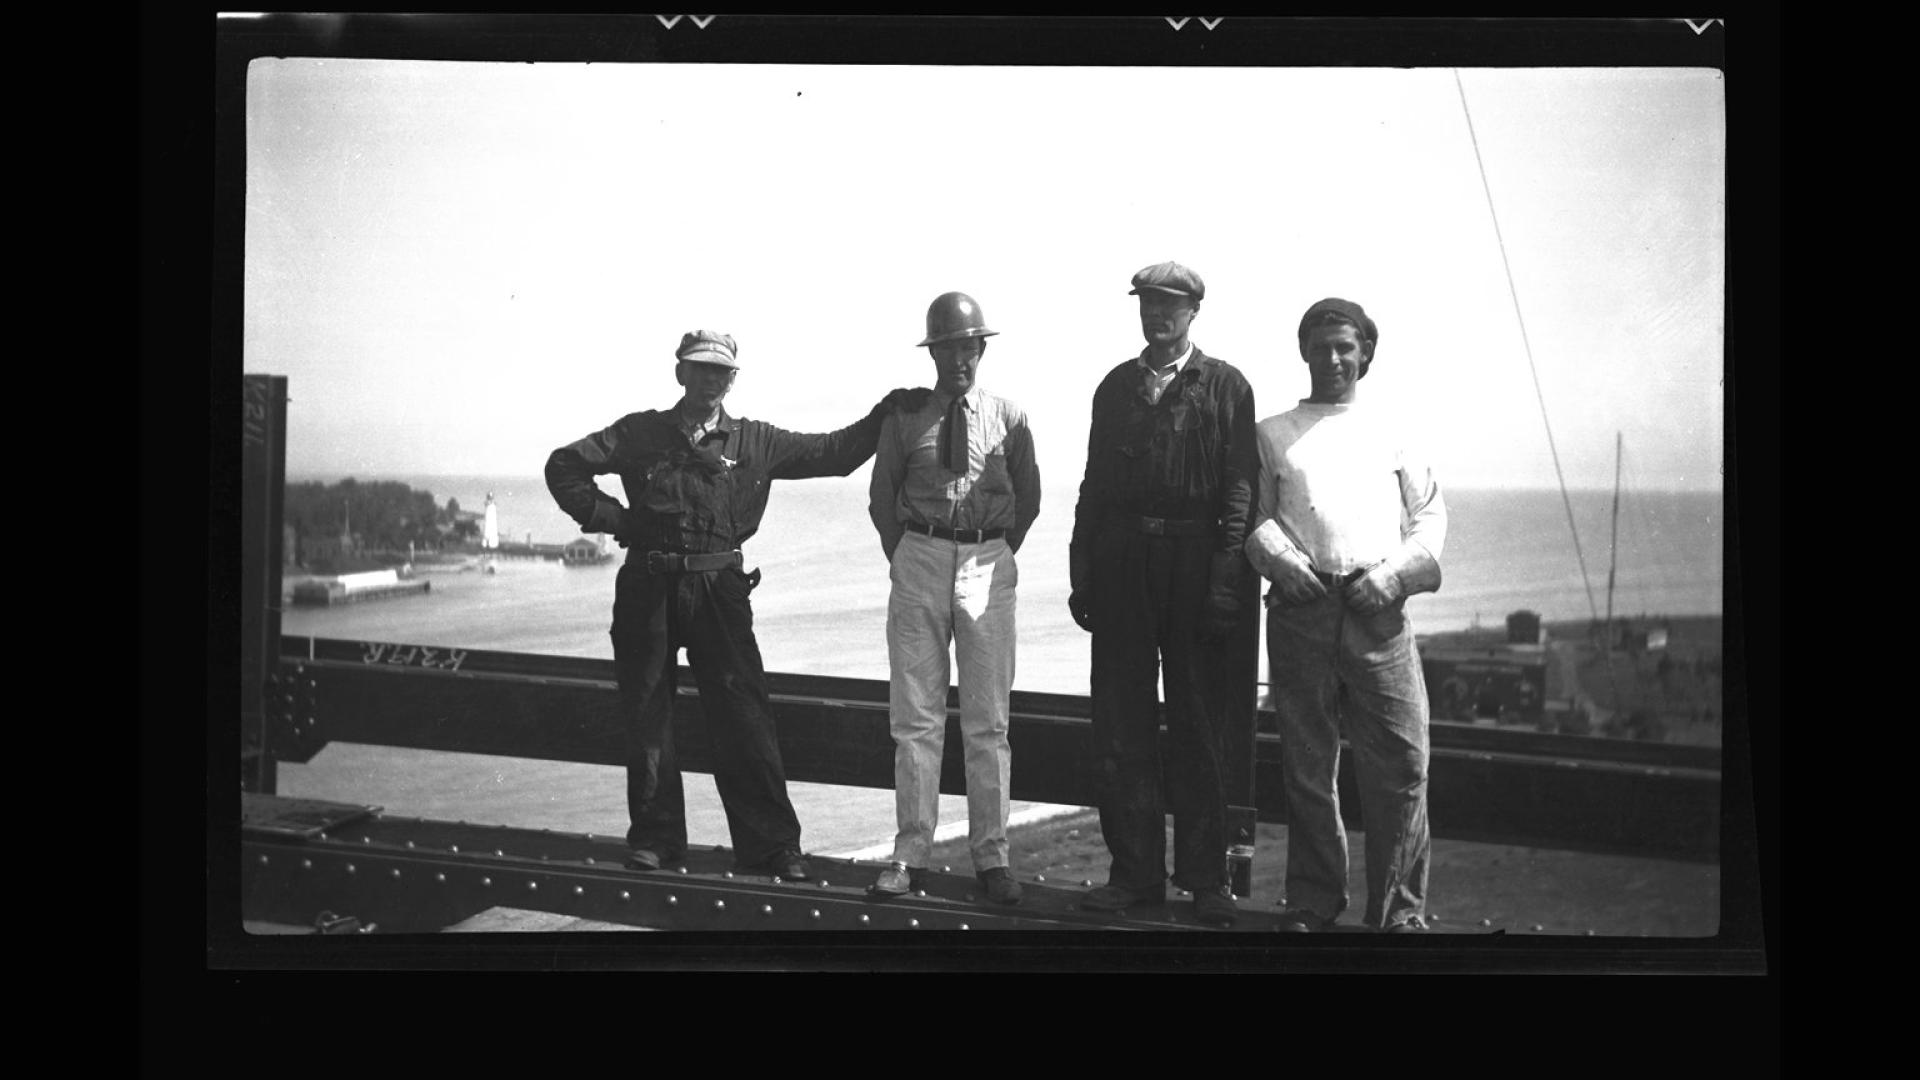 Group of four men posing for a photograph.